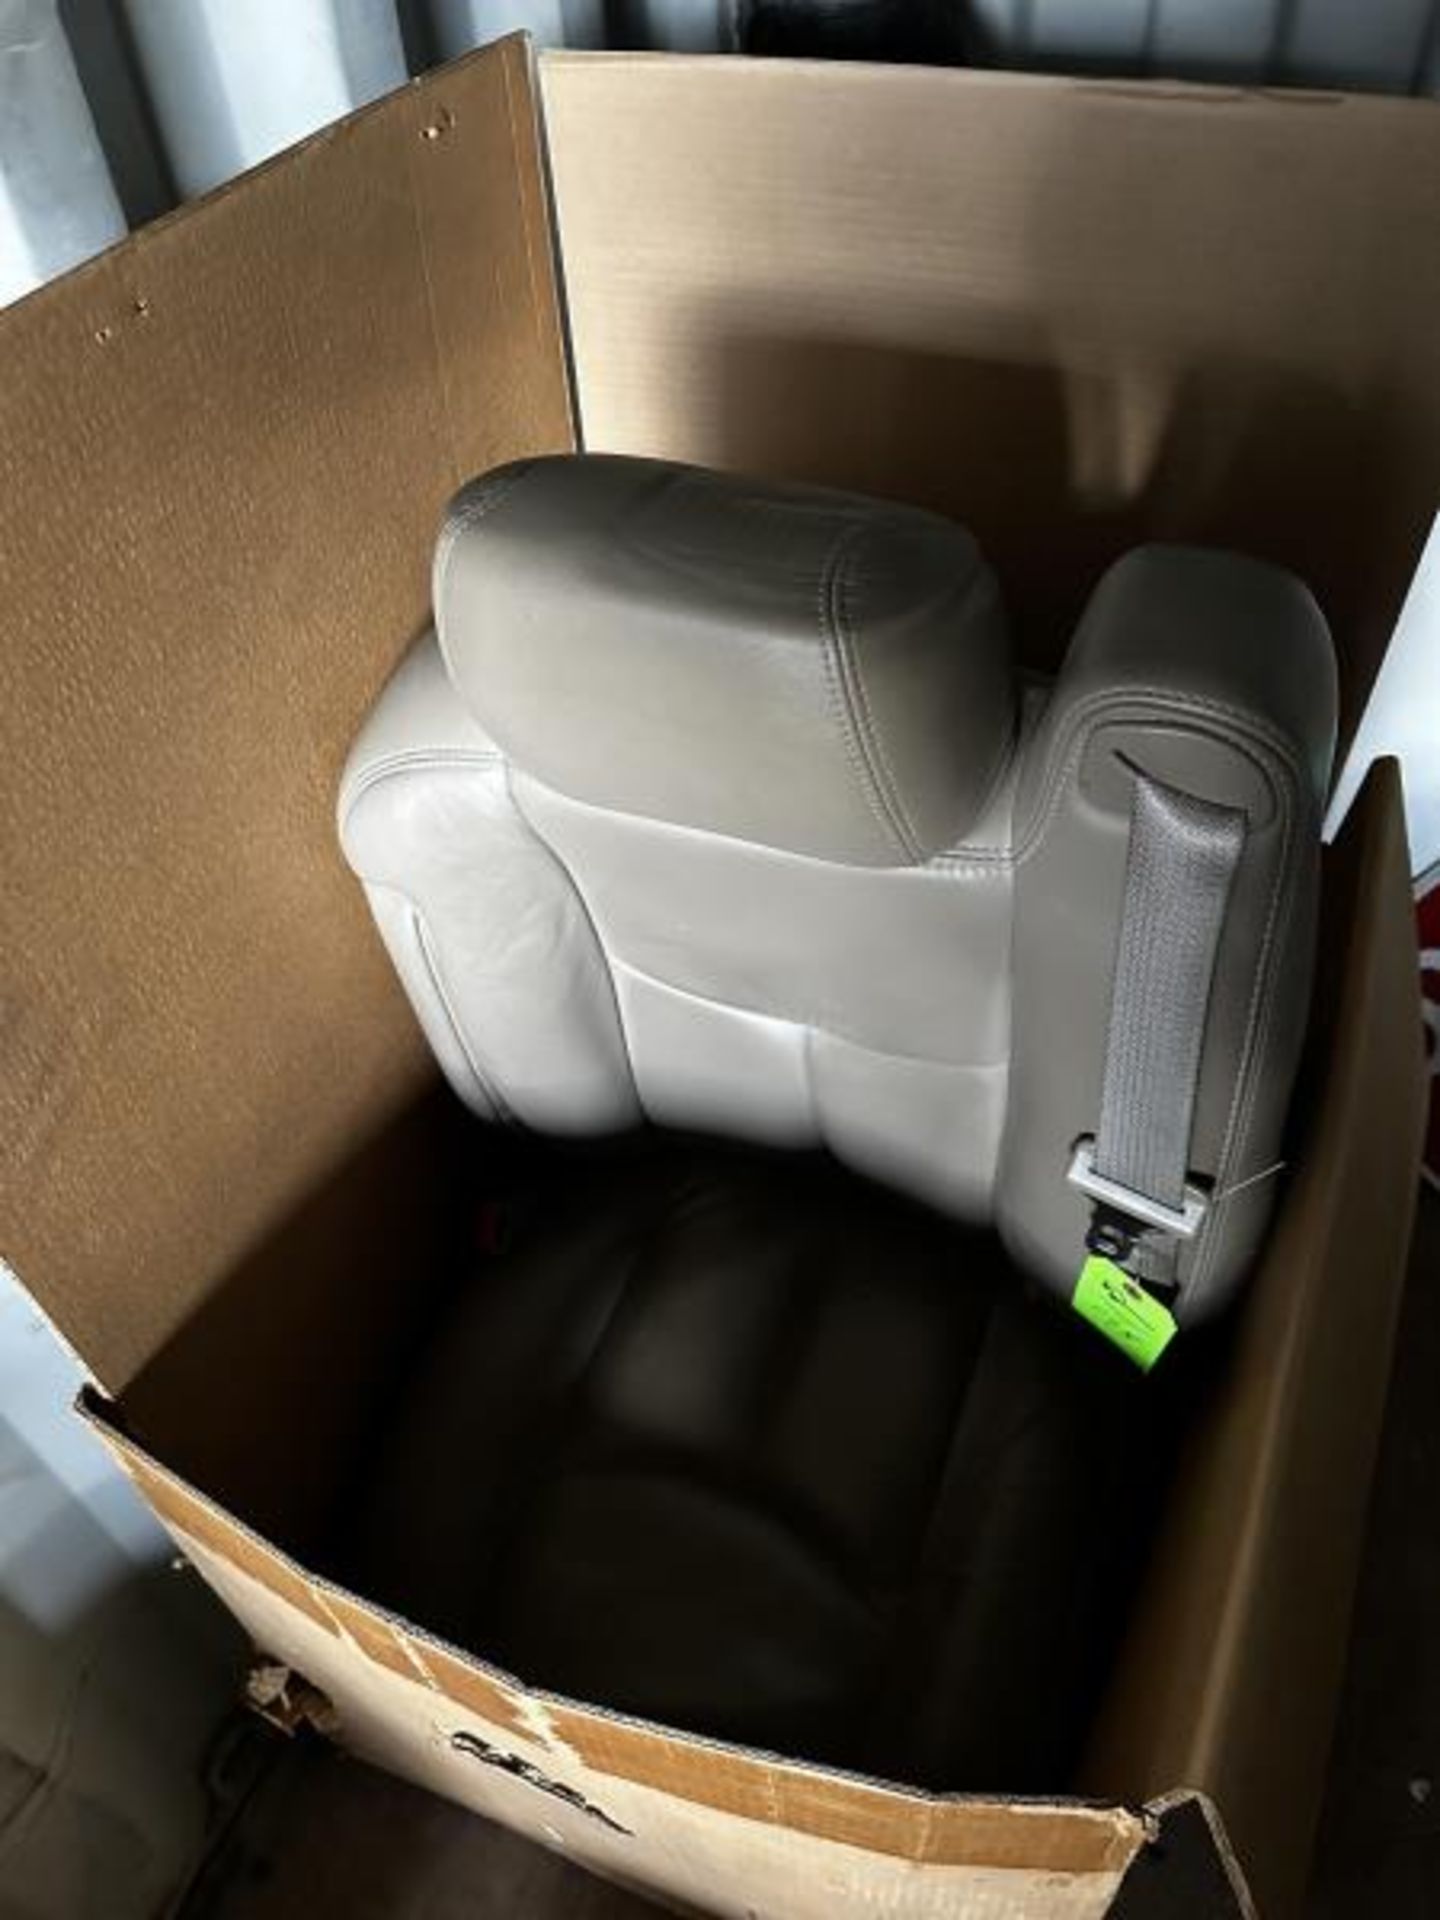 Truck Seat - Image 3 of 3